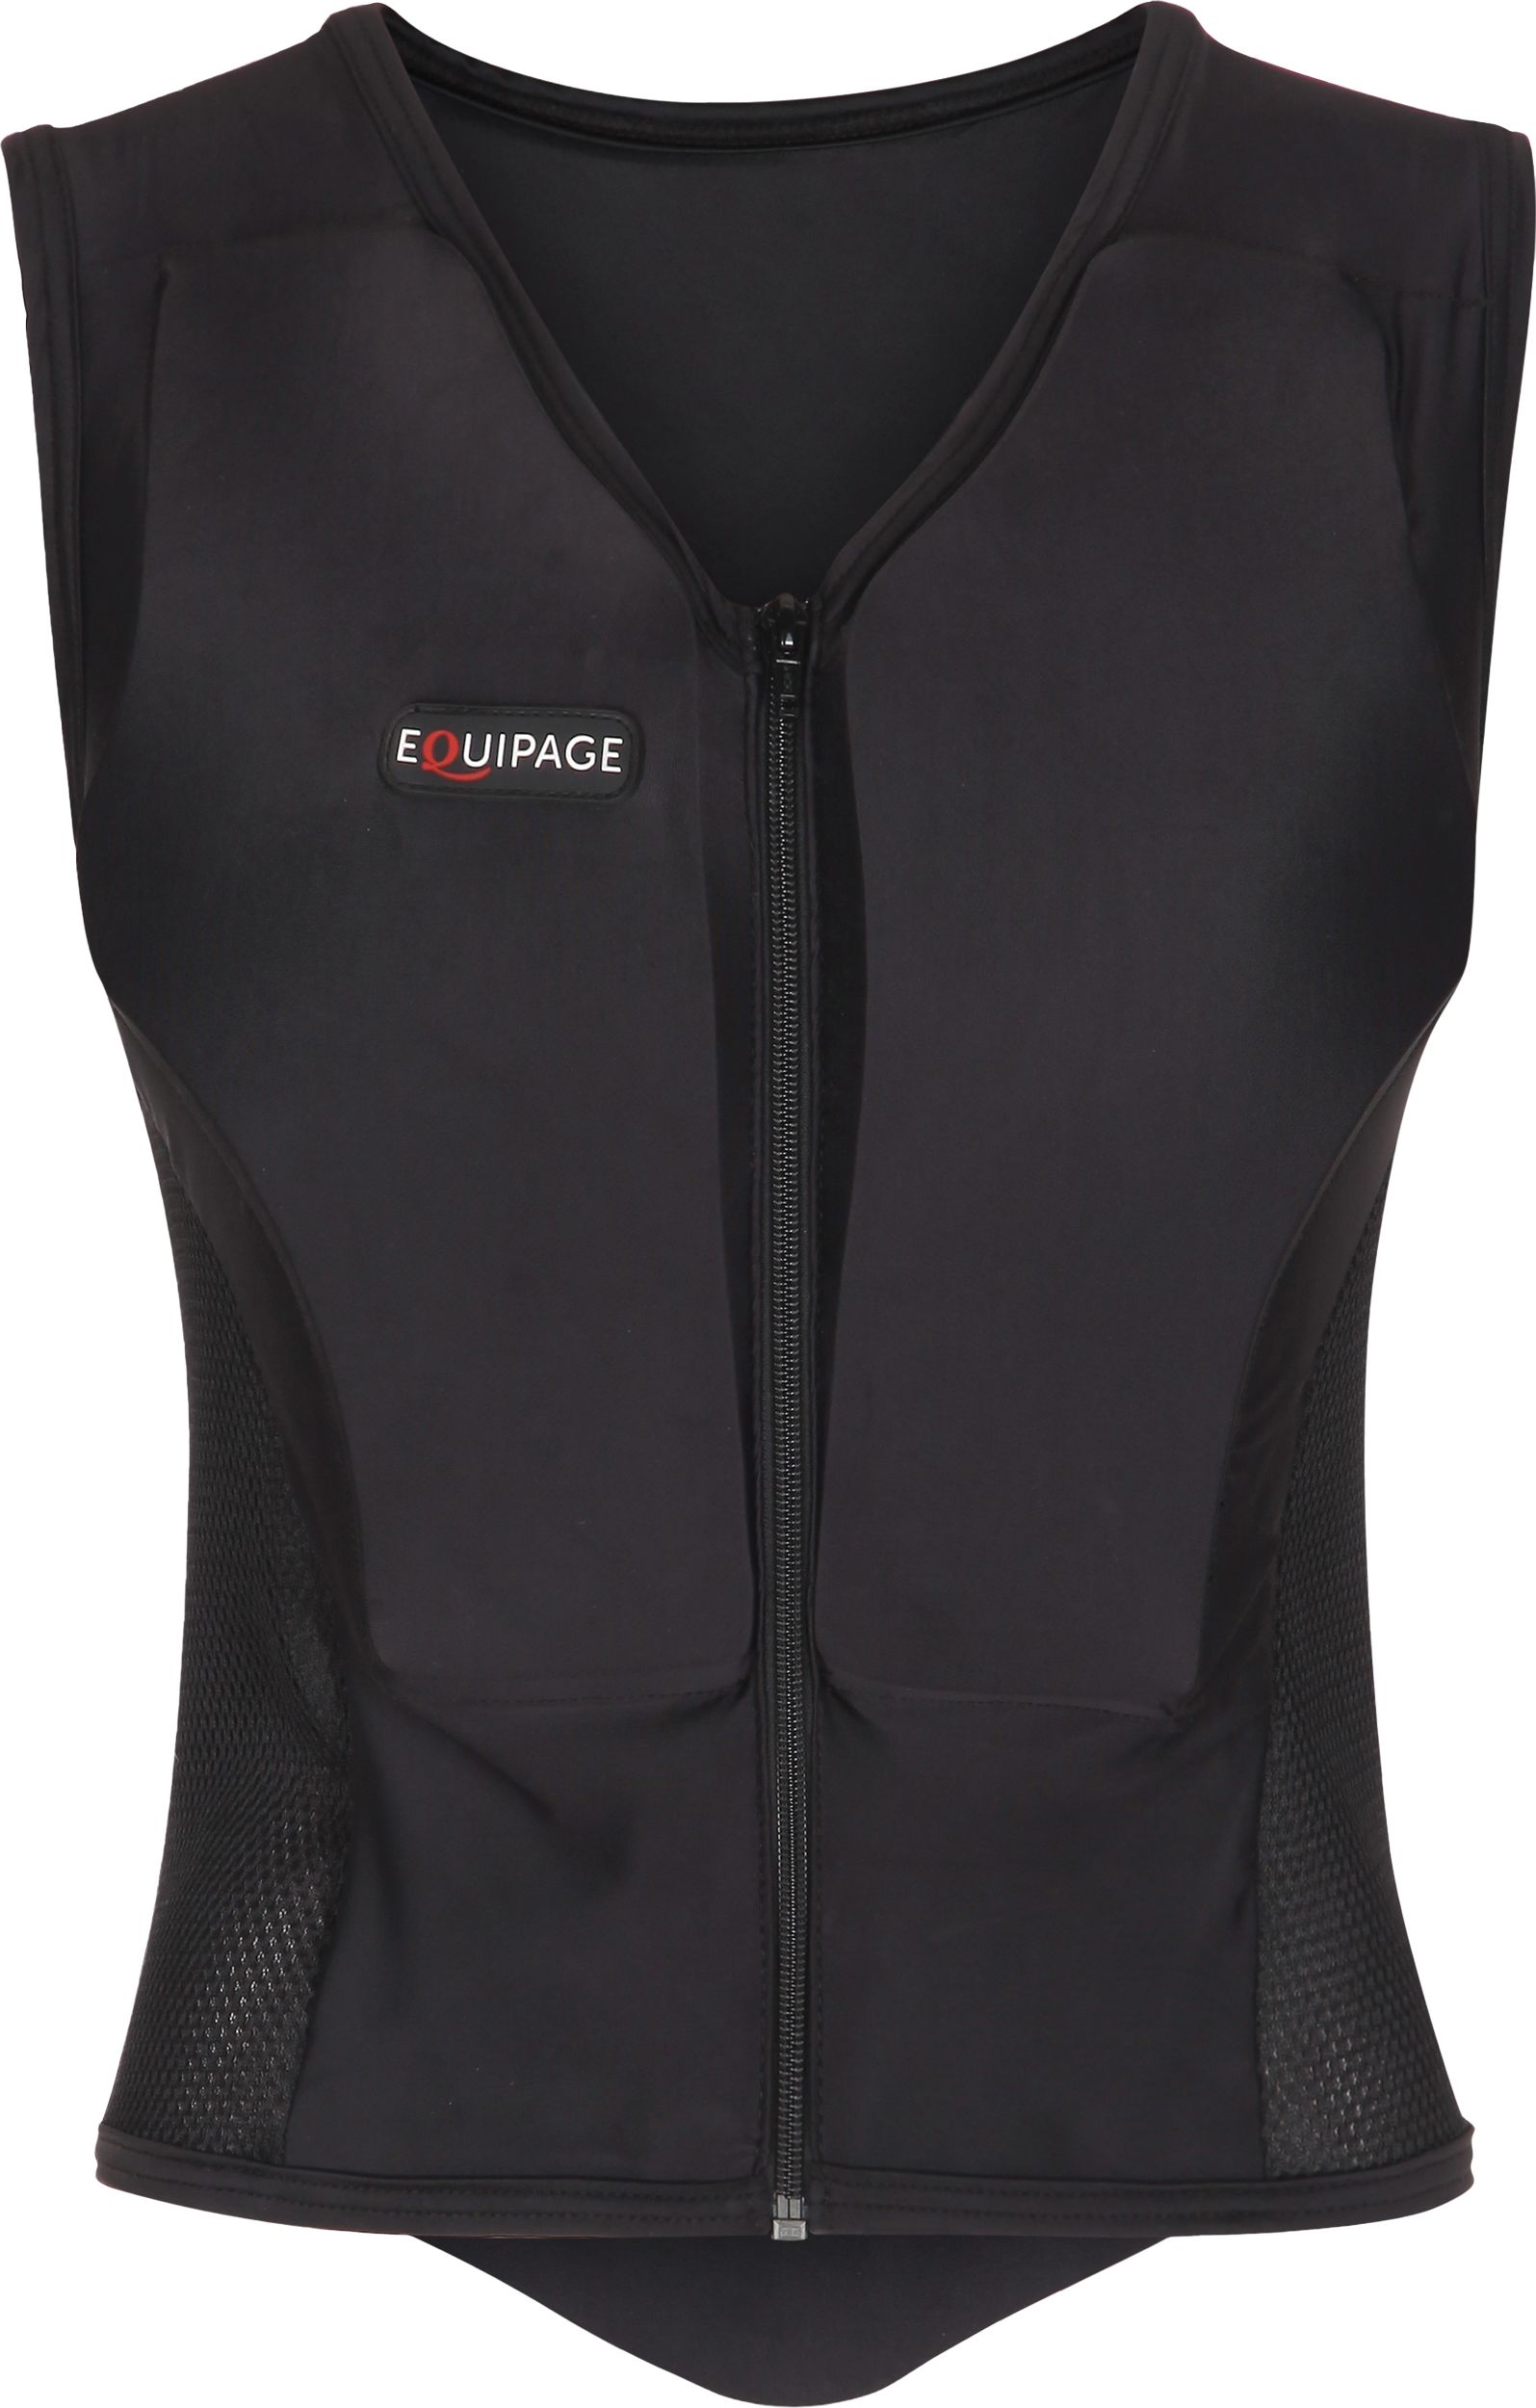 EQUIPAGE, BODY PROTECTION SR